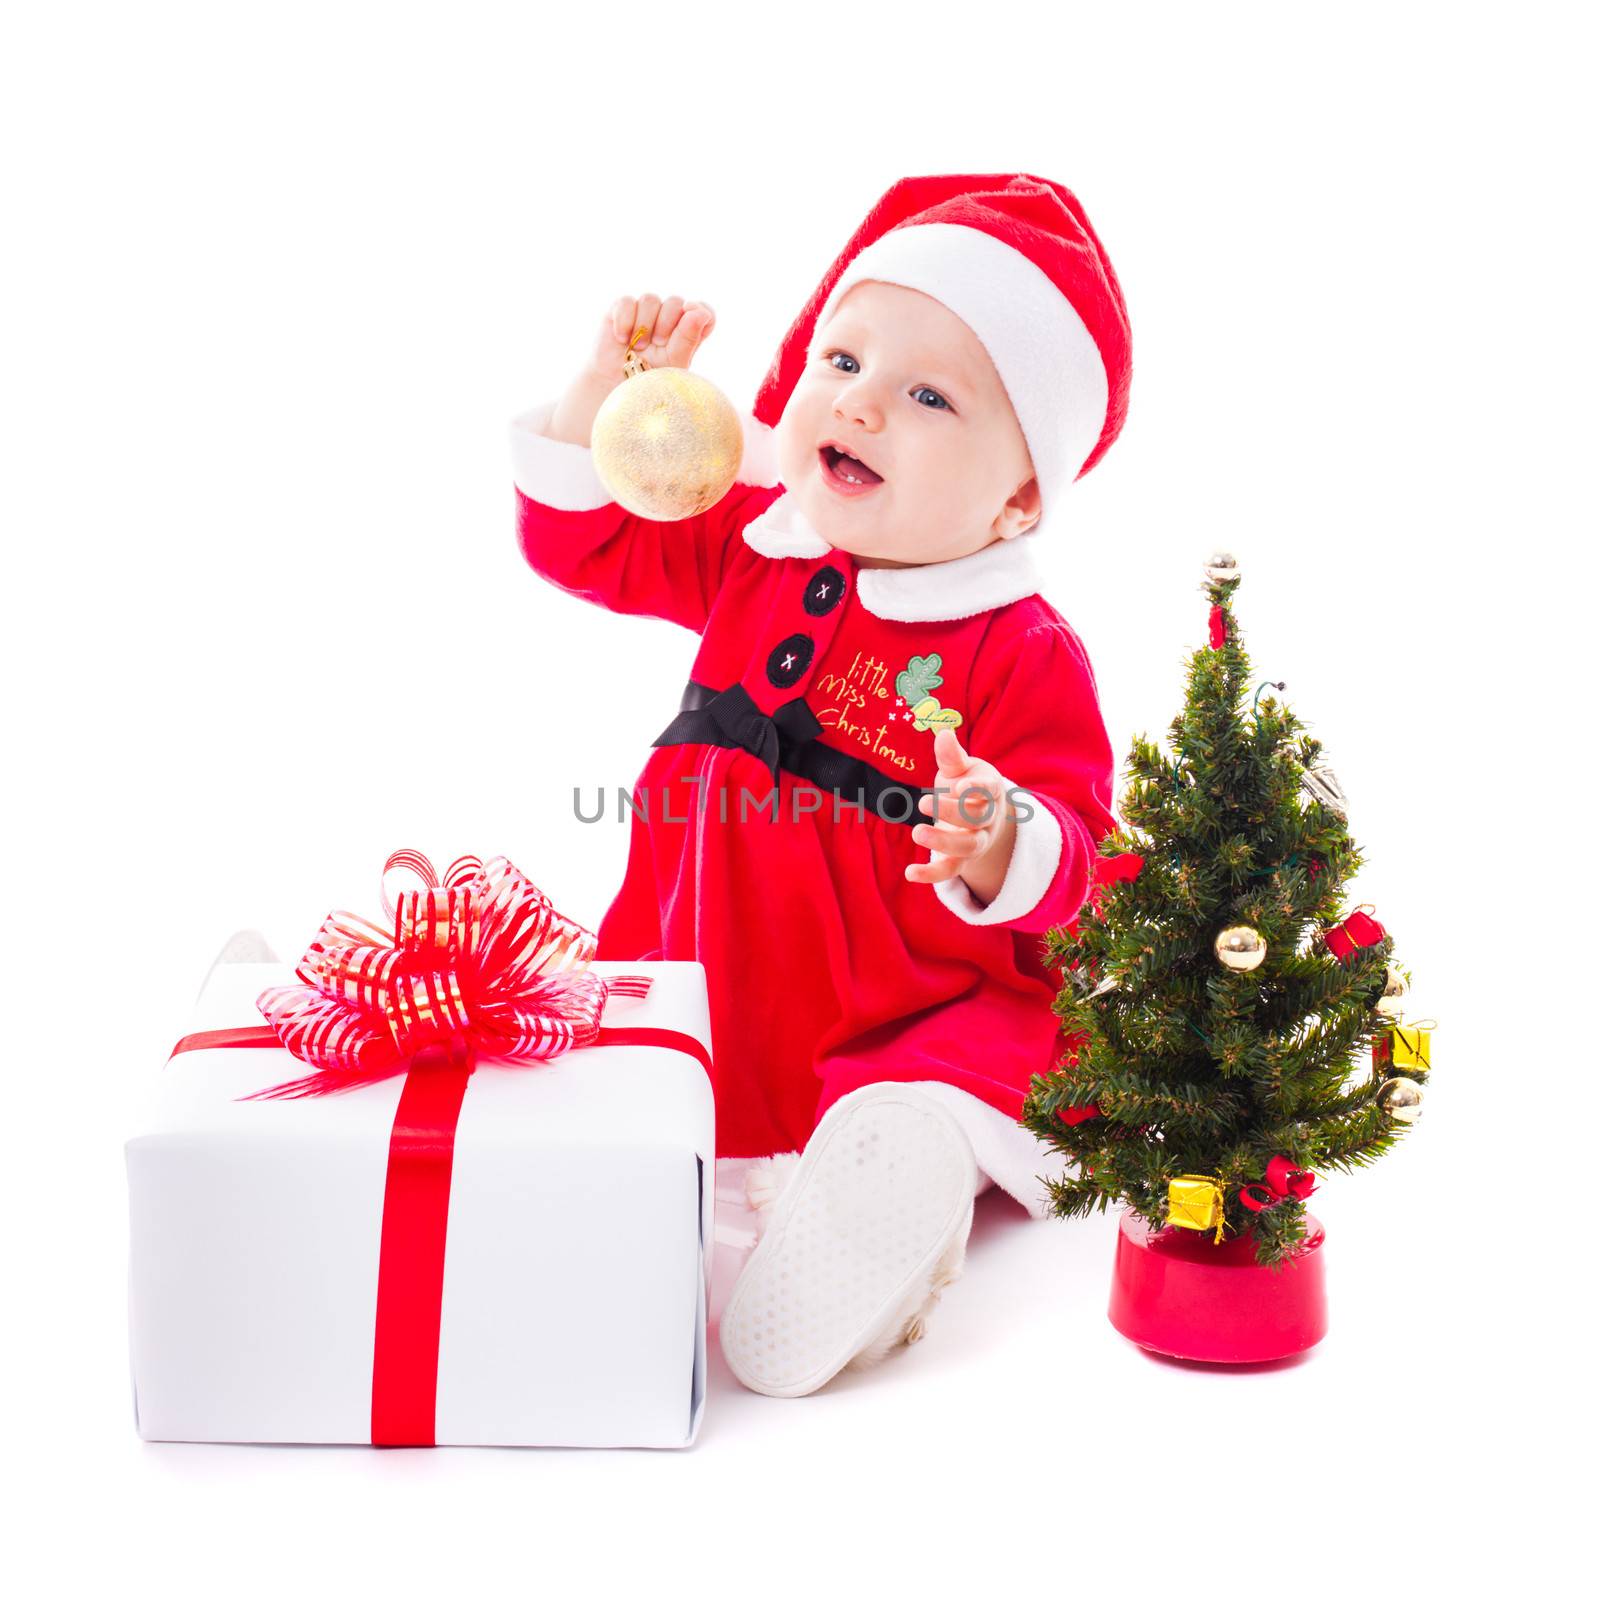 Santa baby girl with gold ball and christmas decorations on white